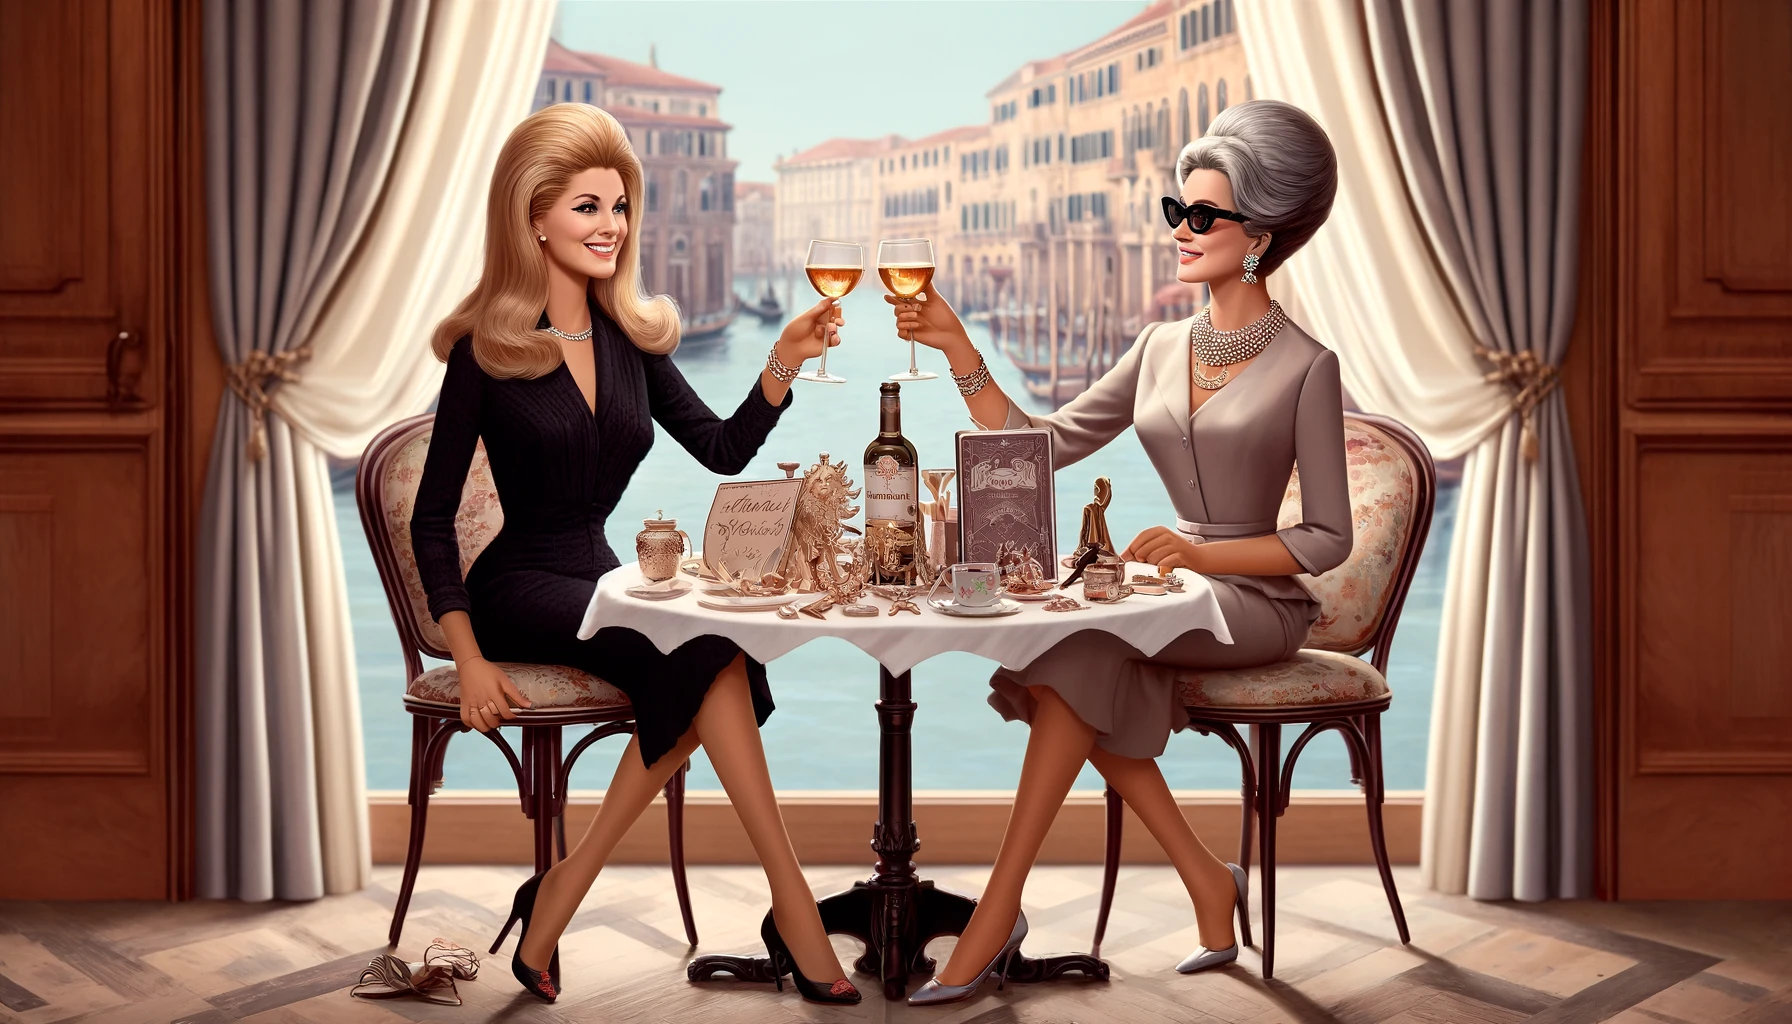 Kathy Fields and Marie Read Sai sitting at a cafe in Venice, celebrating Mother's Day. They are elegantly dressed, with Kathy and Marie . They are surrounded by personalized Italian gifts, enhancing the luxurious and festive atmosphere of their toast.